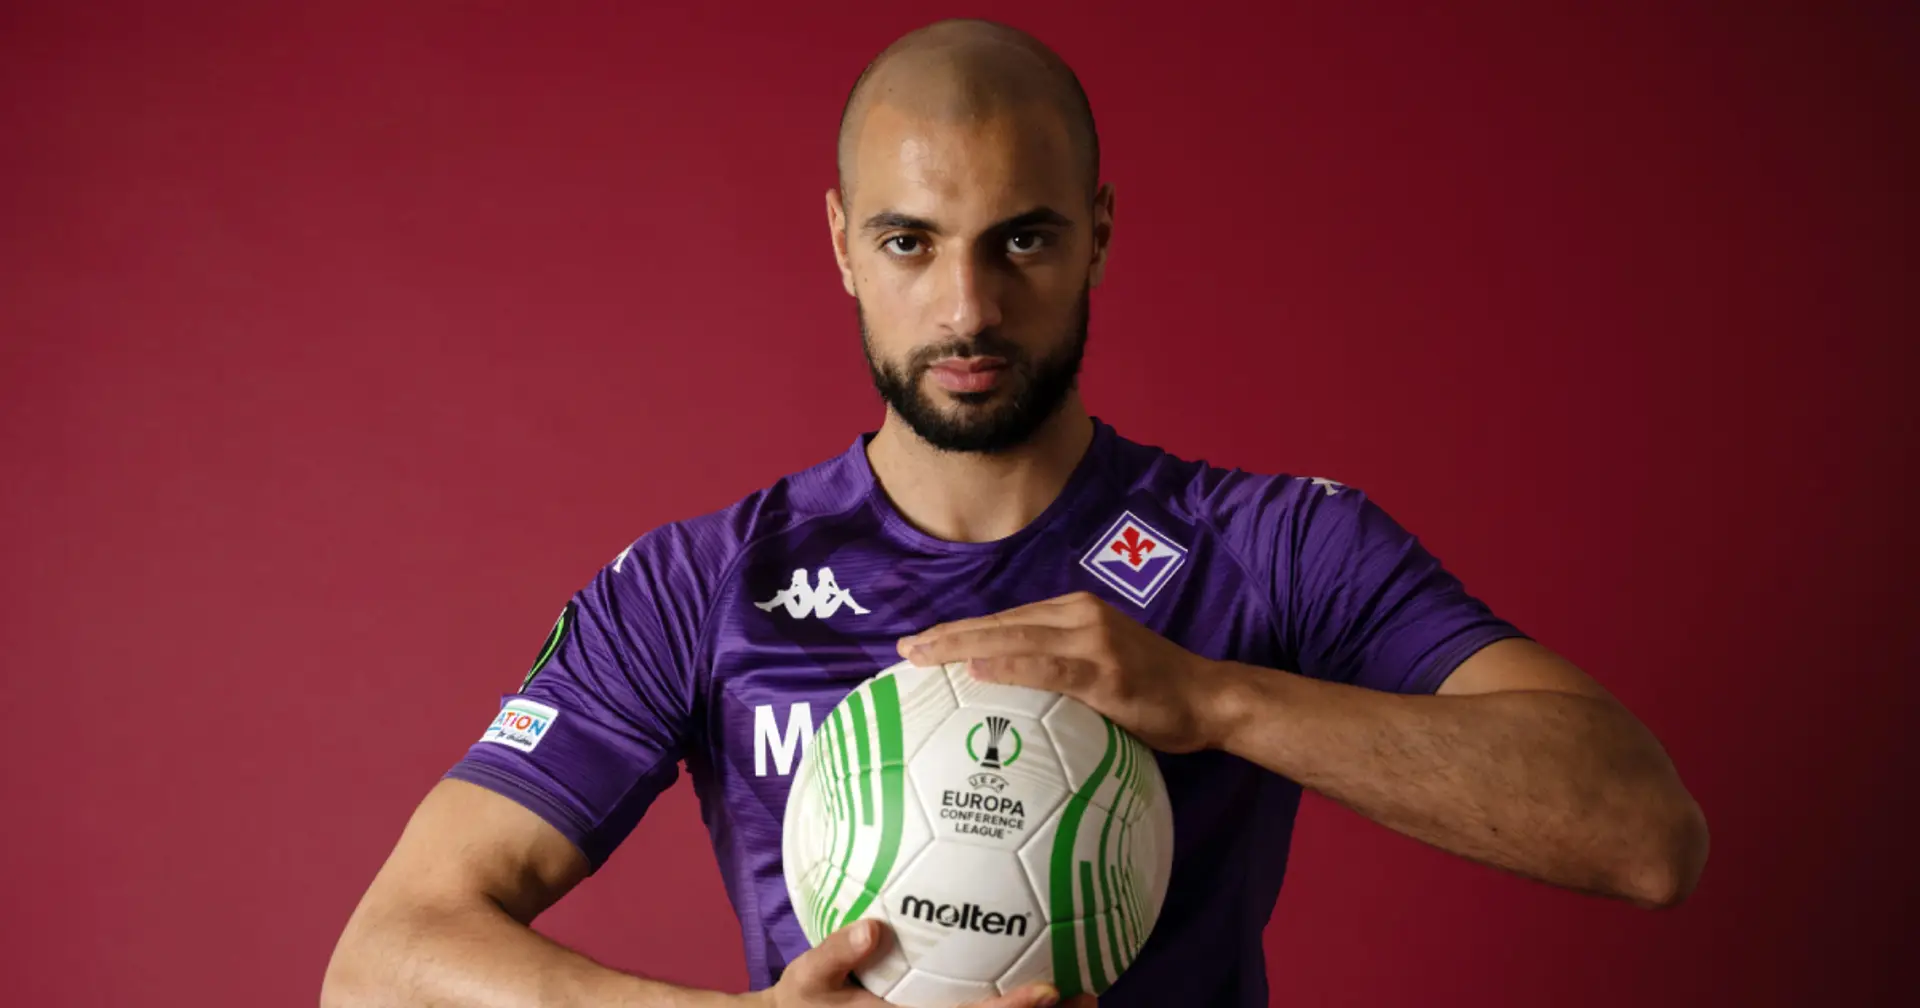 Sofyan Amrabat excluded from Fiorentina squad amid Man United links (reliability: 5 stars)